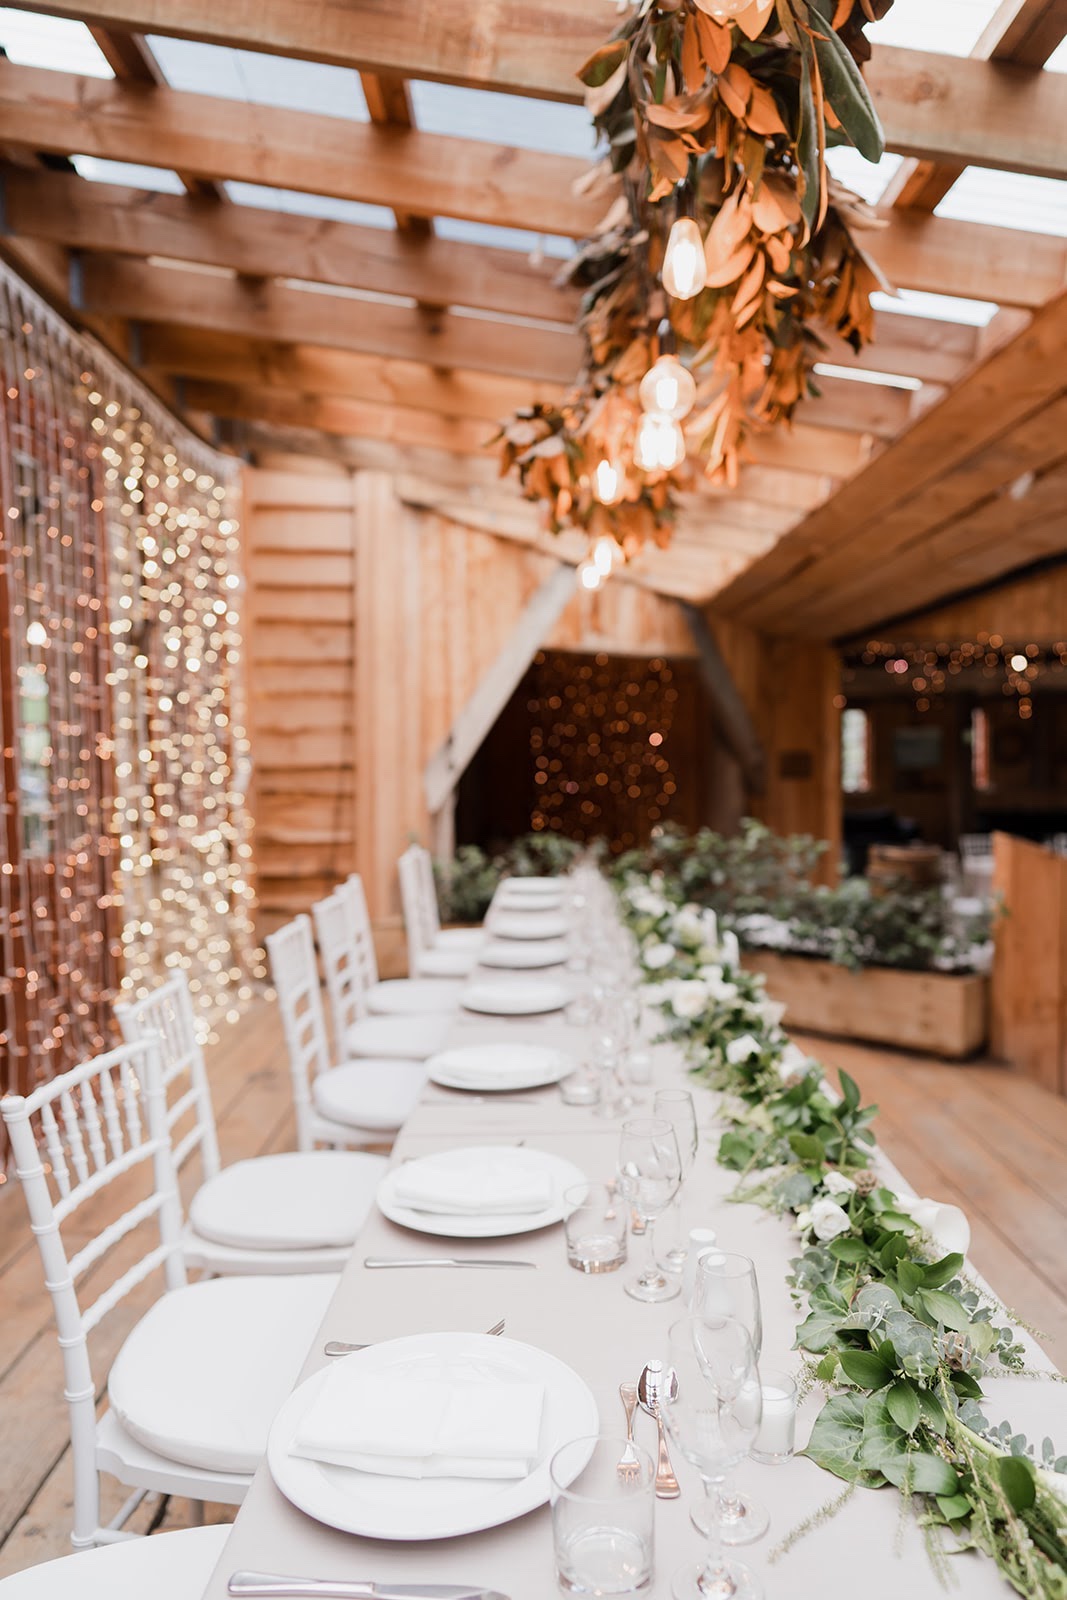 WHITE-GREEN-BRIDAL-TABLE-IN-BARN-WITH-FLORAL-CENTER-TABLE-SETTING